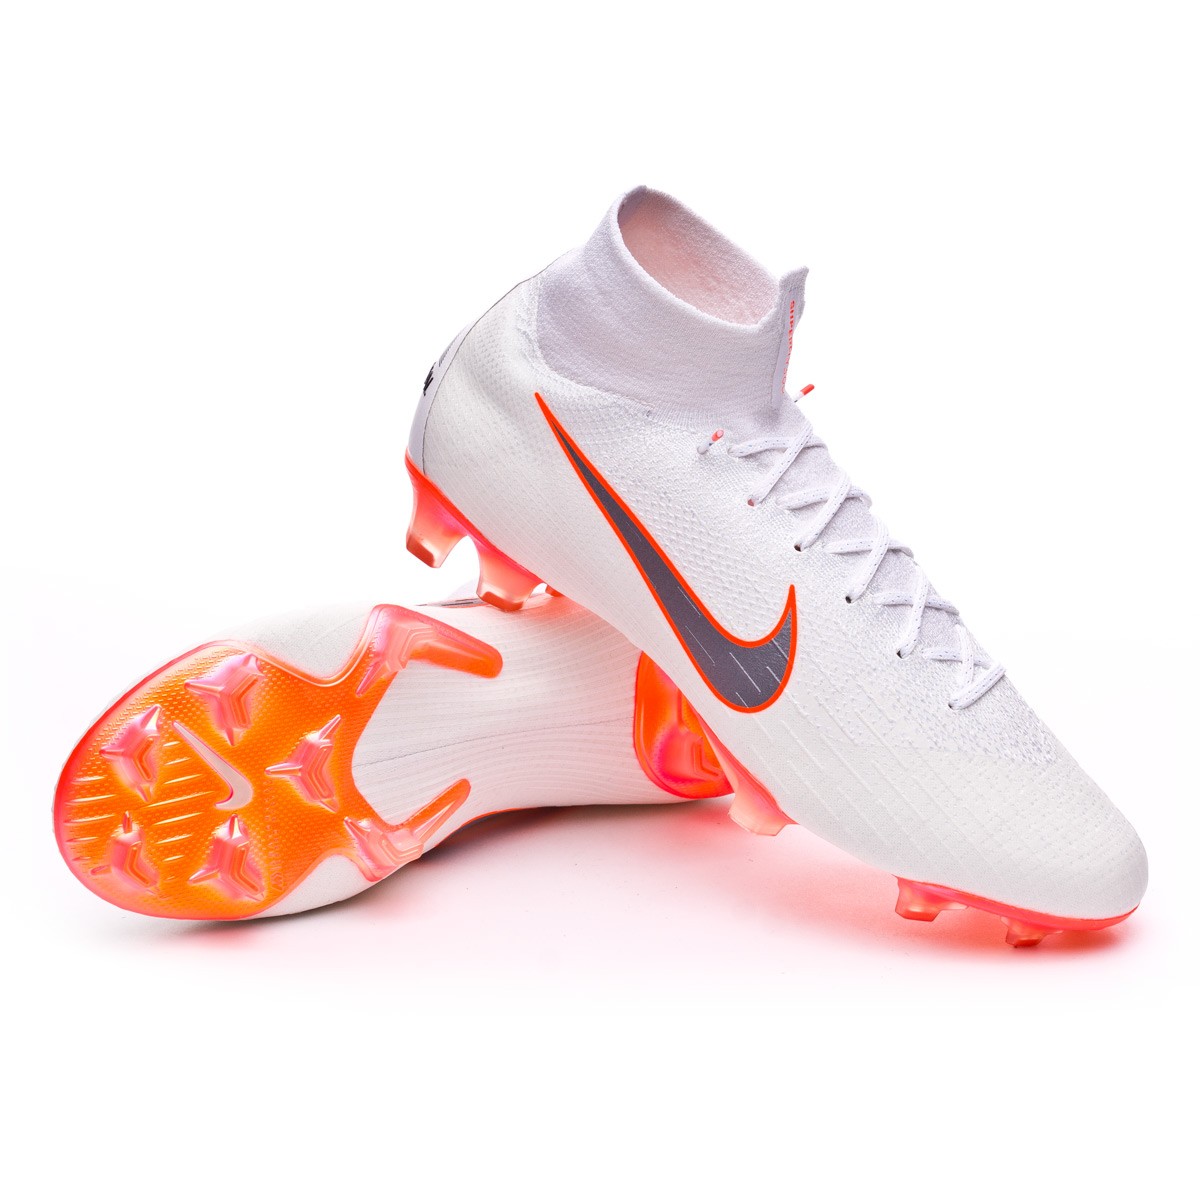 Mercurial Superfly 6 Academy MG 'White 